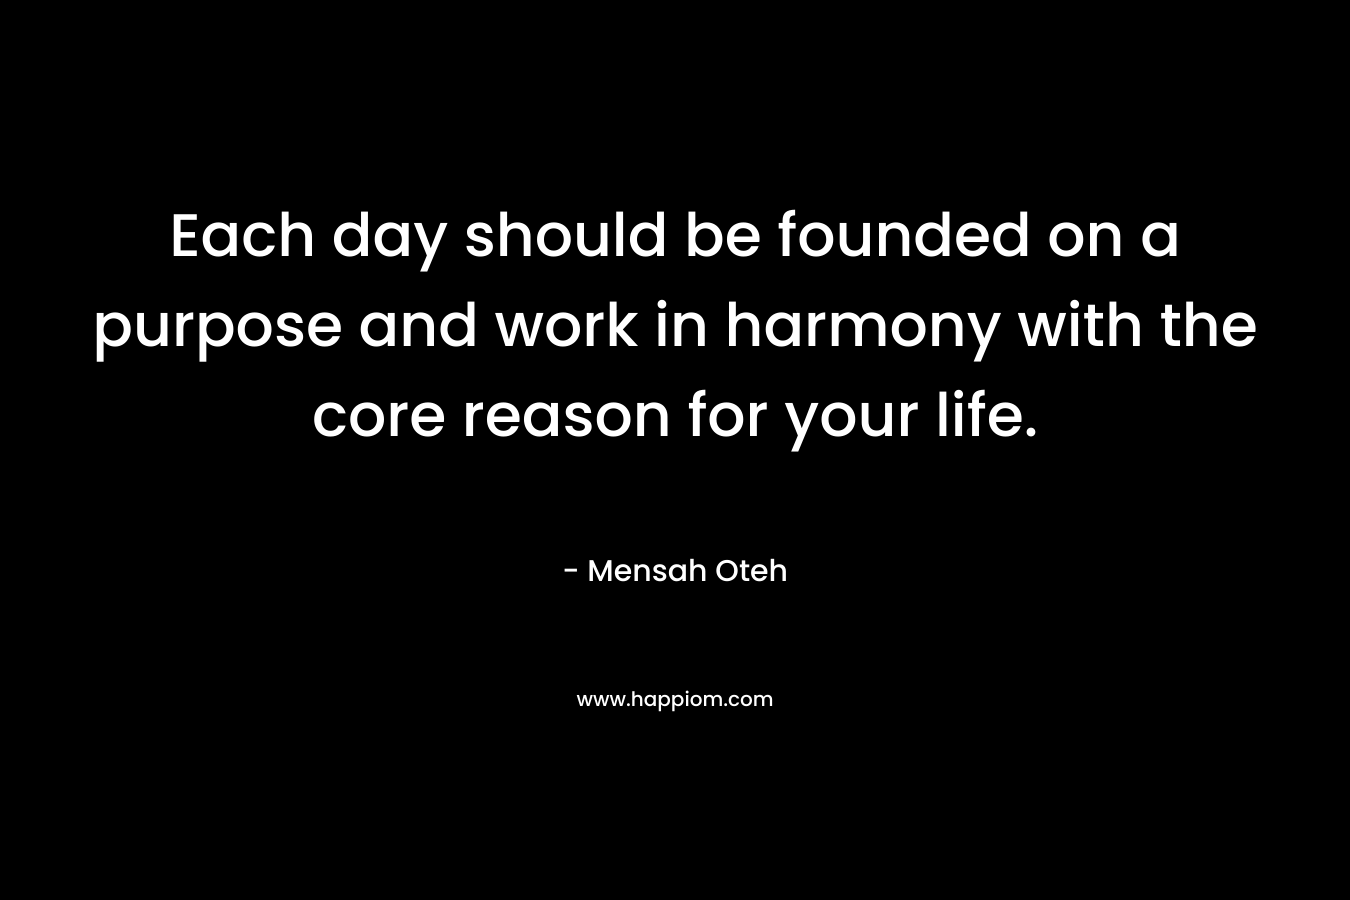 Each day should be founded on a purpose and work in harmony with the core reason for your life.